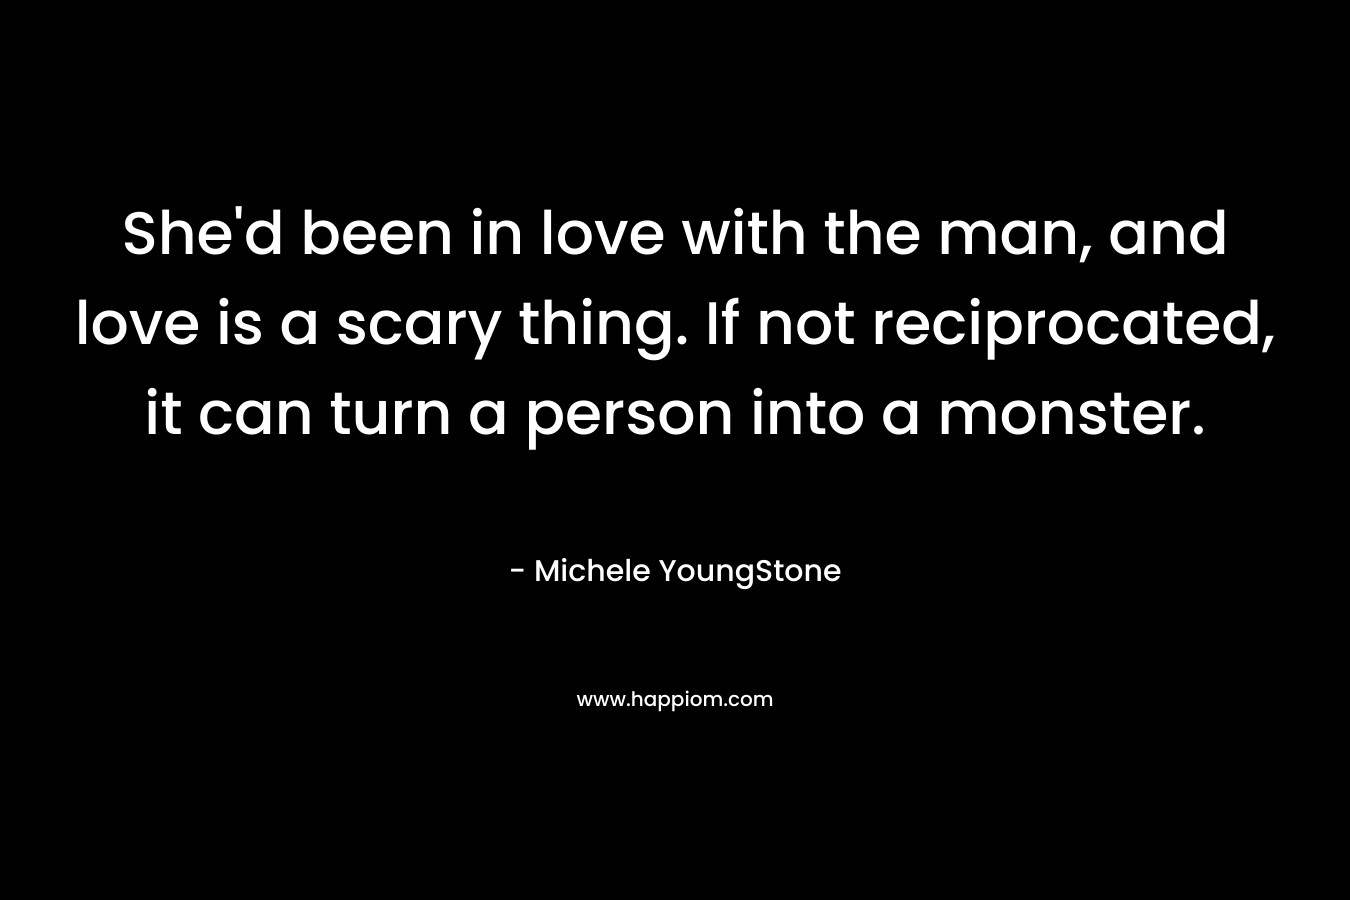 She'd been in love with the man, and love is a scary thing. If not reciprocated, it can turn a person into a monster.